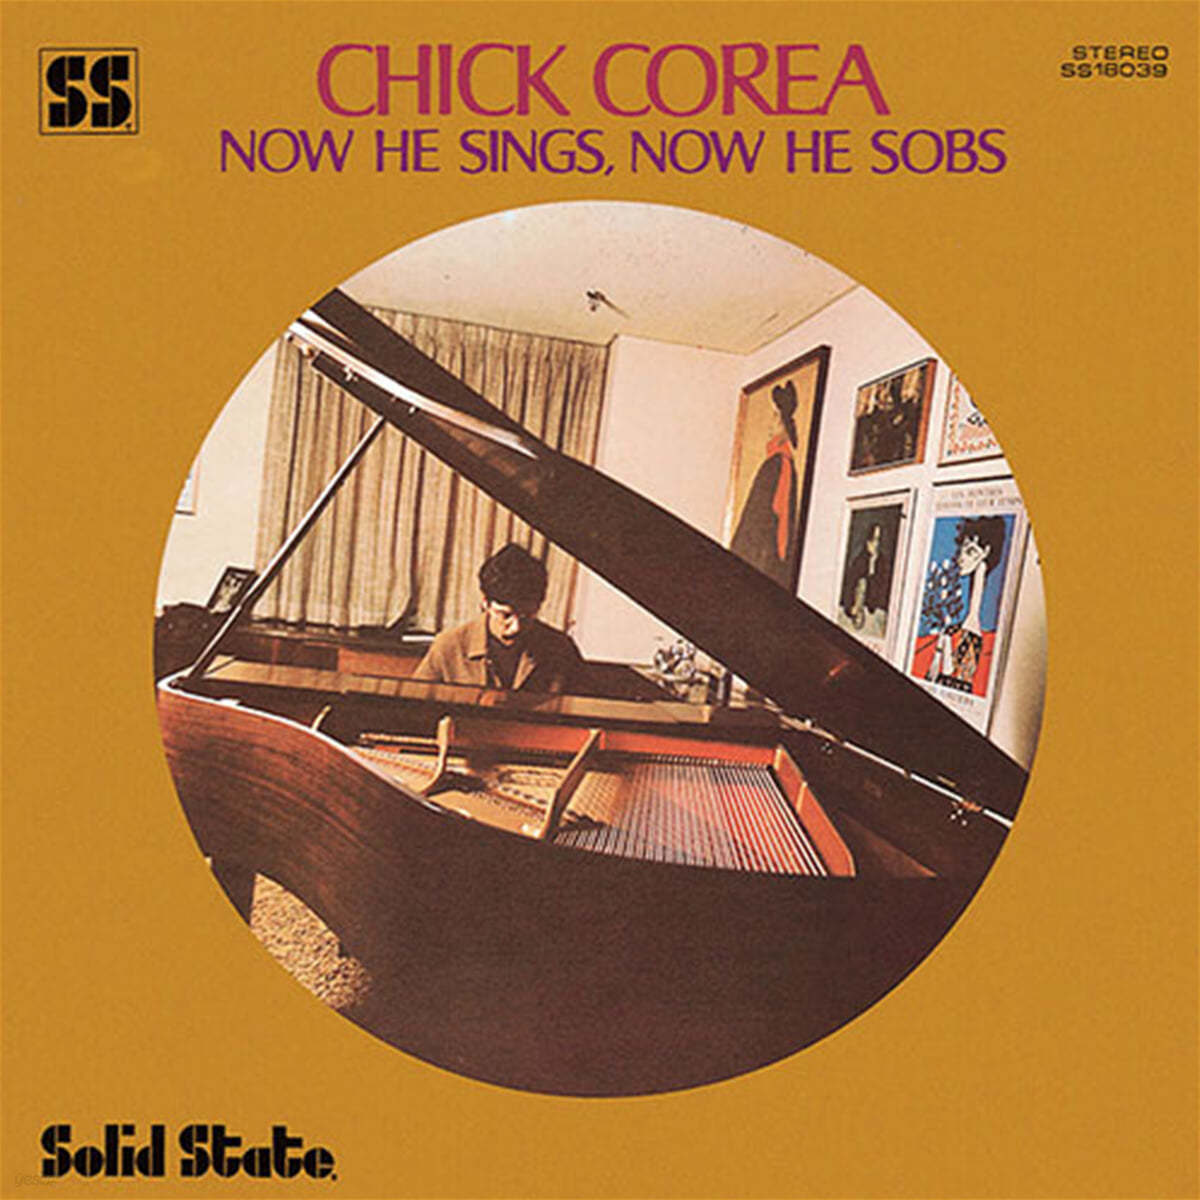 Chick Corea (칙 코리아) - Now He Sings, Now He Sobs 